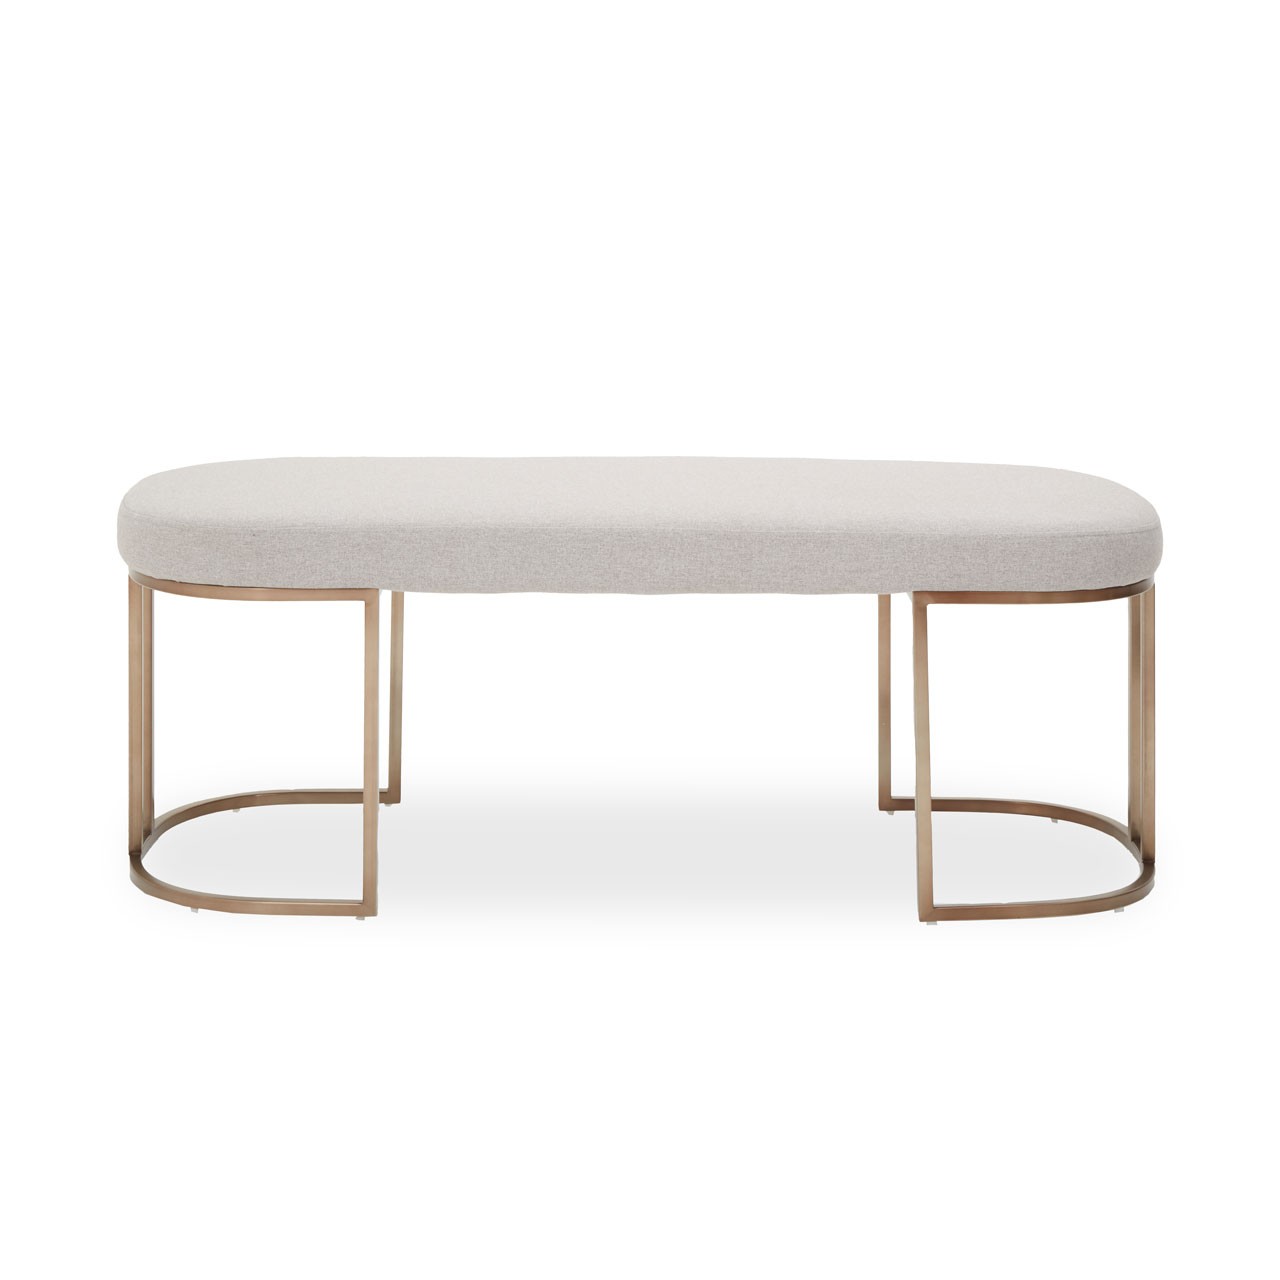 Gilberta Natural Curved Upholstered Bench